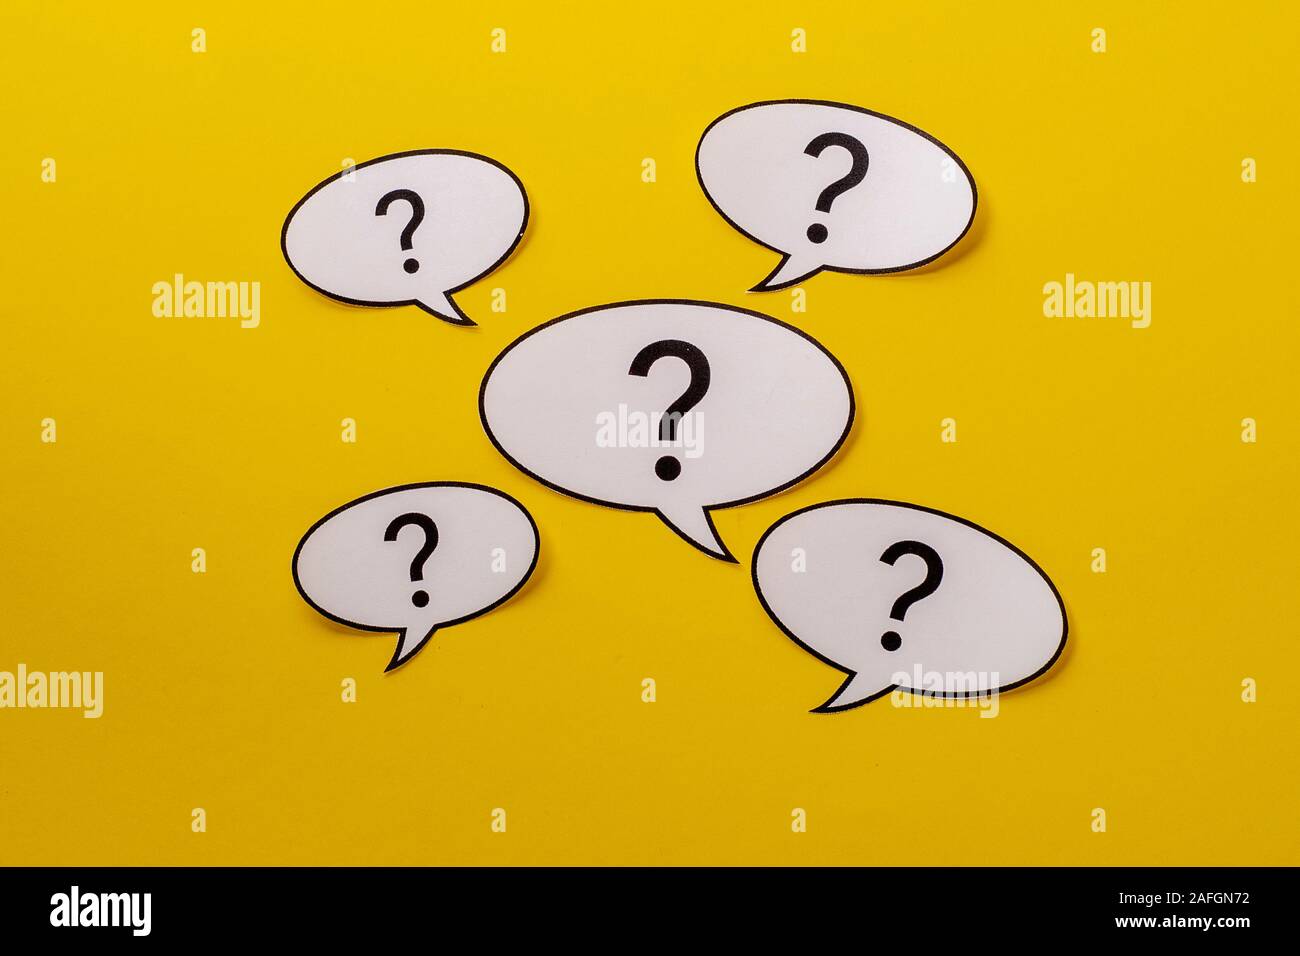 Five speech bubbles with question marks over a bright yellow background Stock Photo